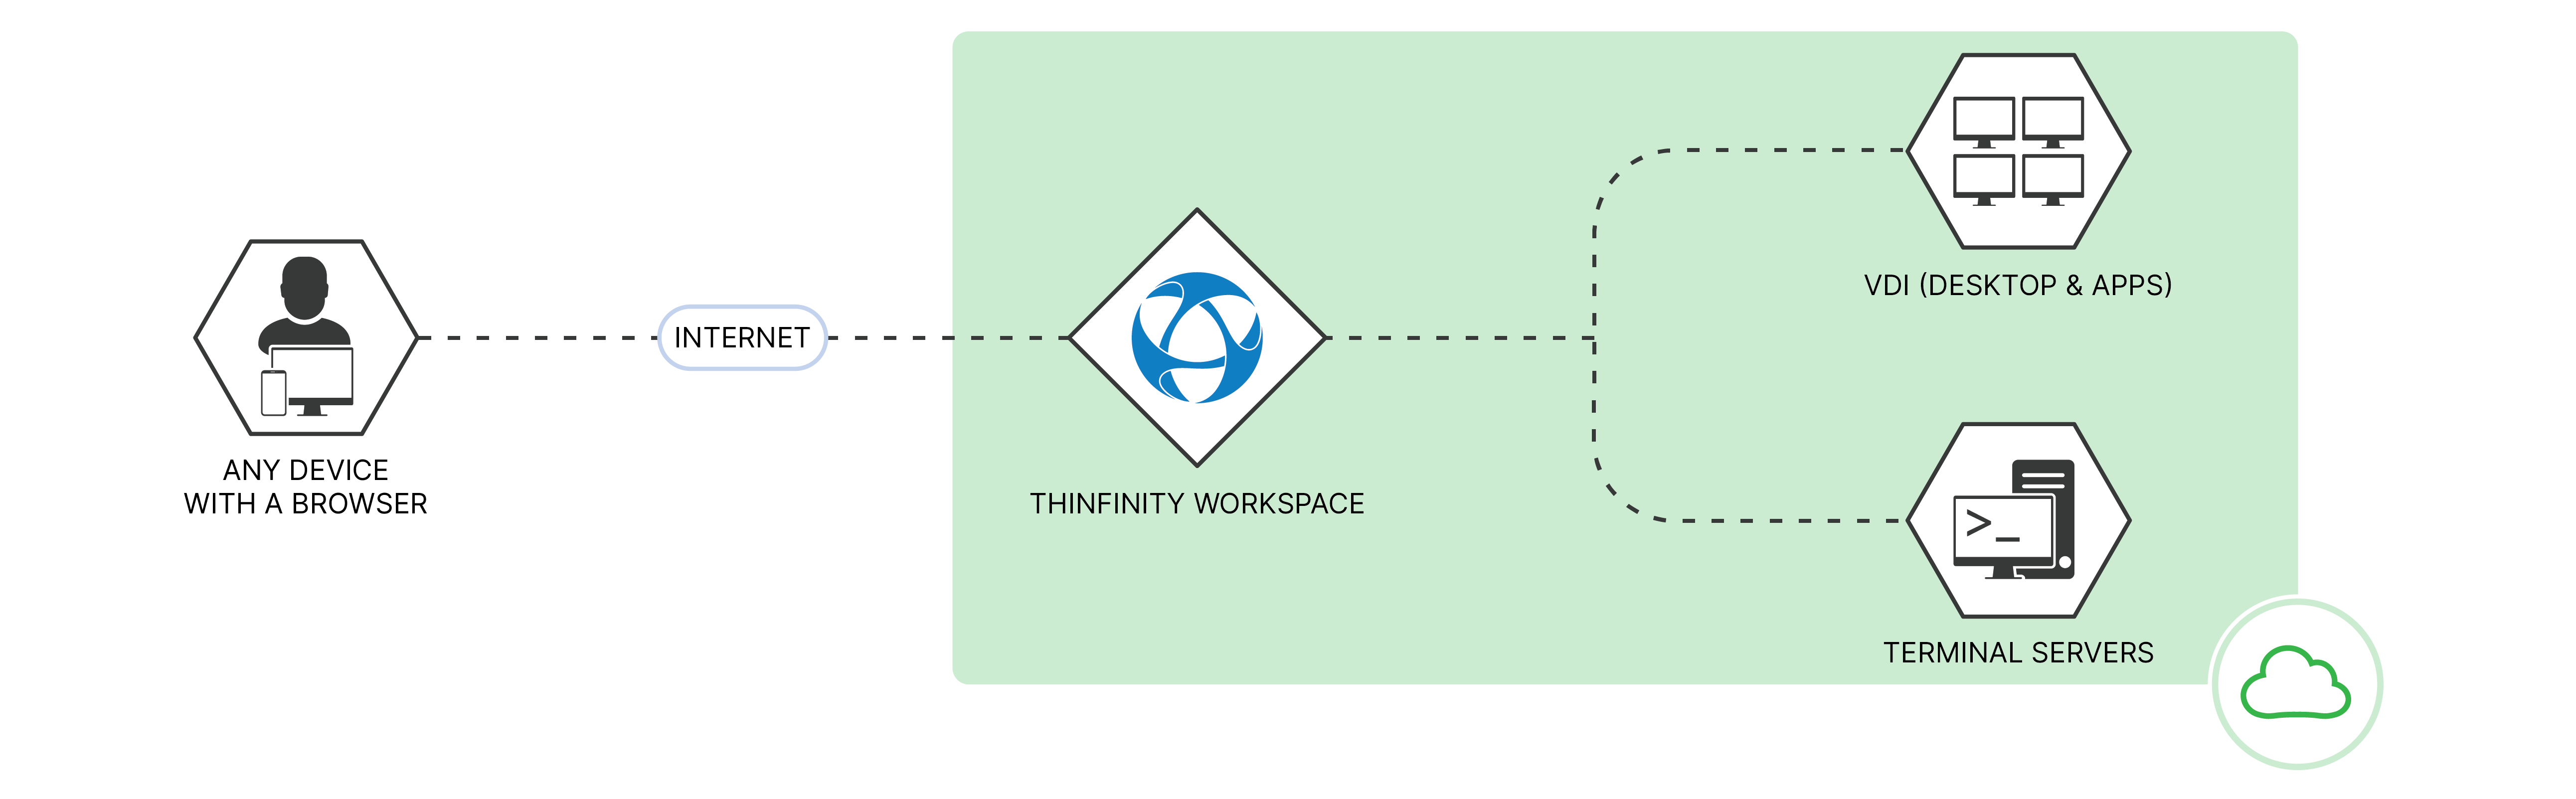 Thinfinity-Workspace-Cloud